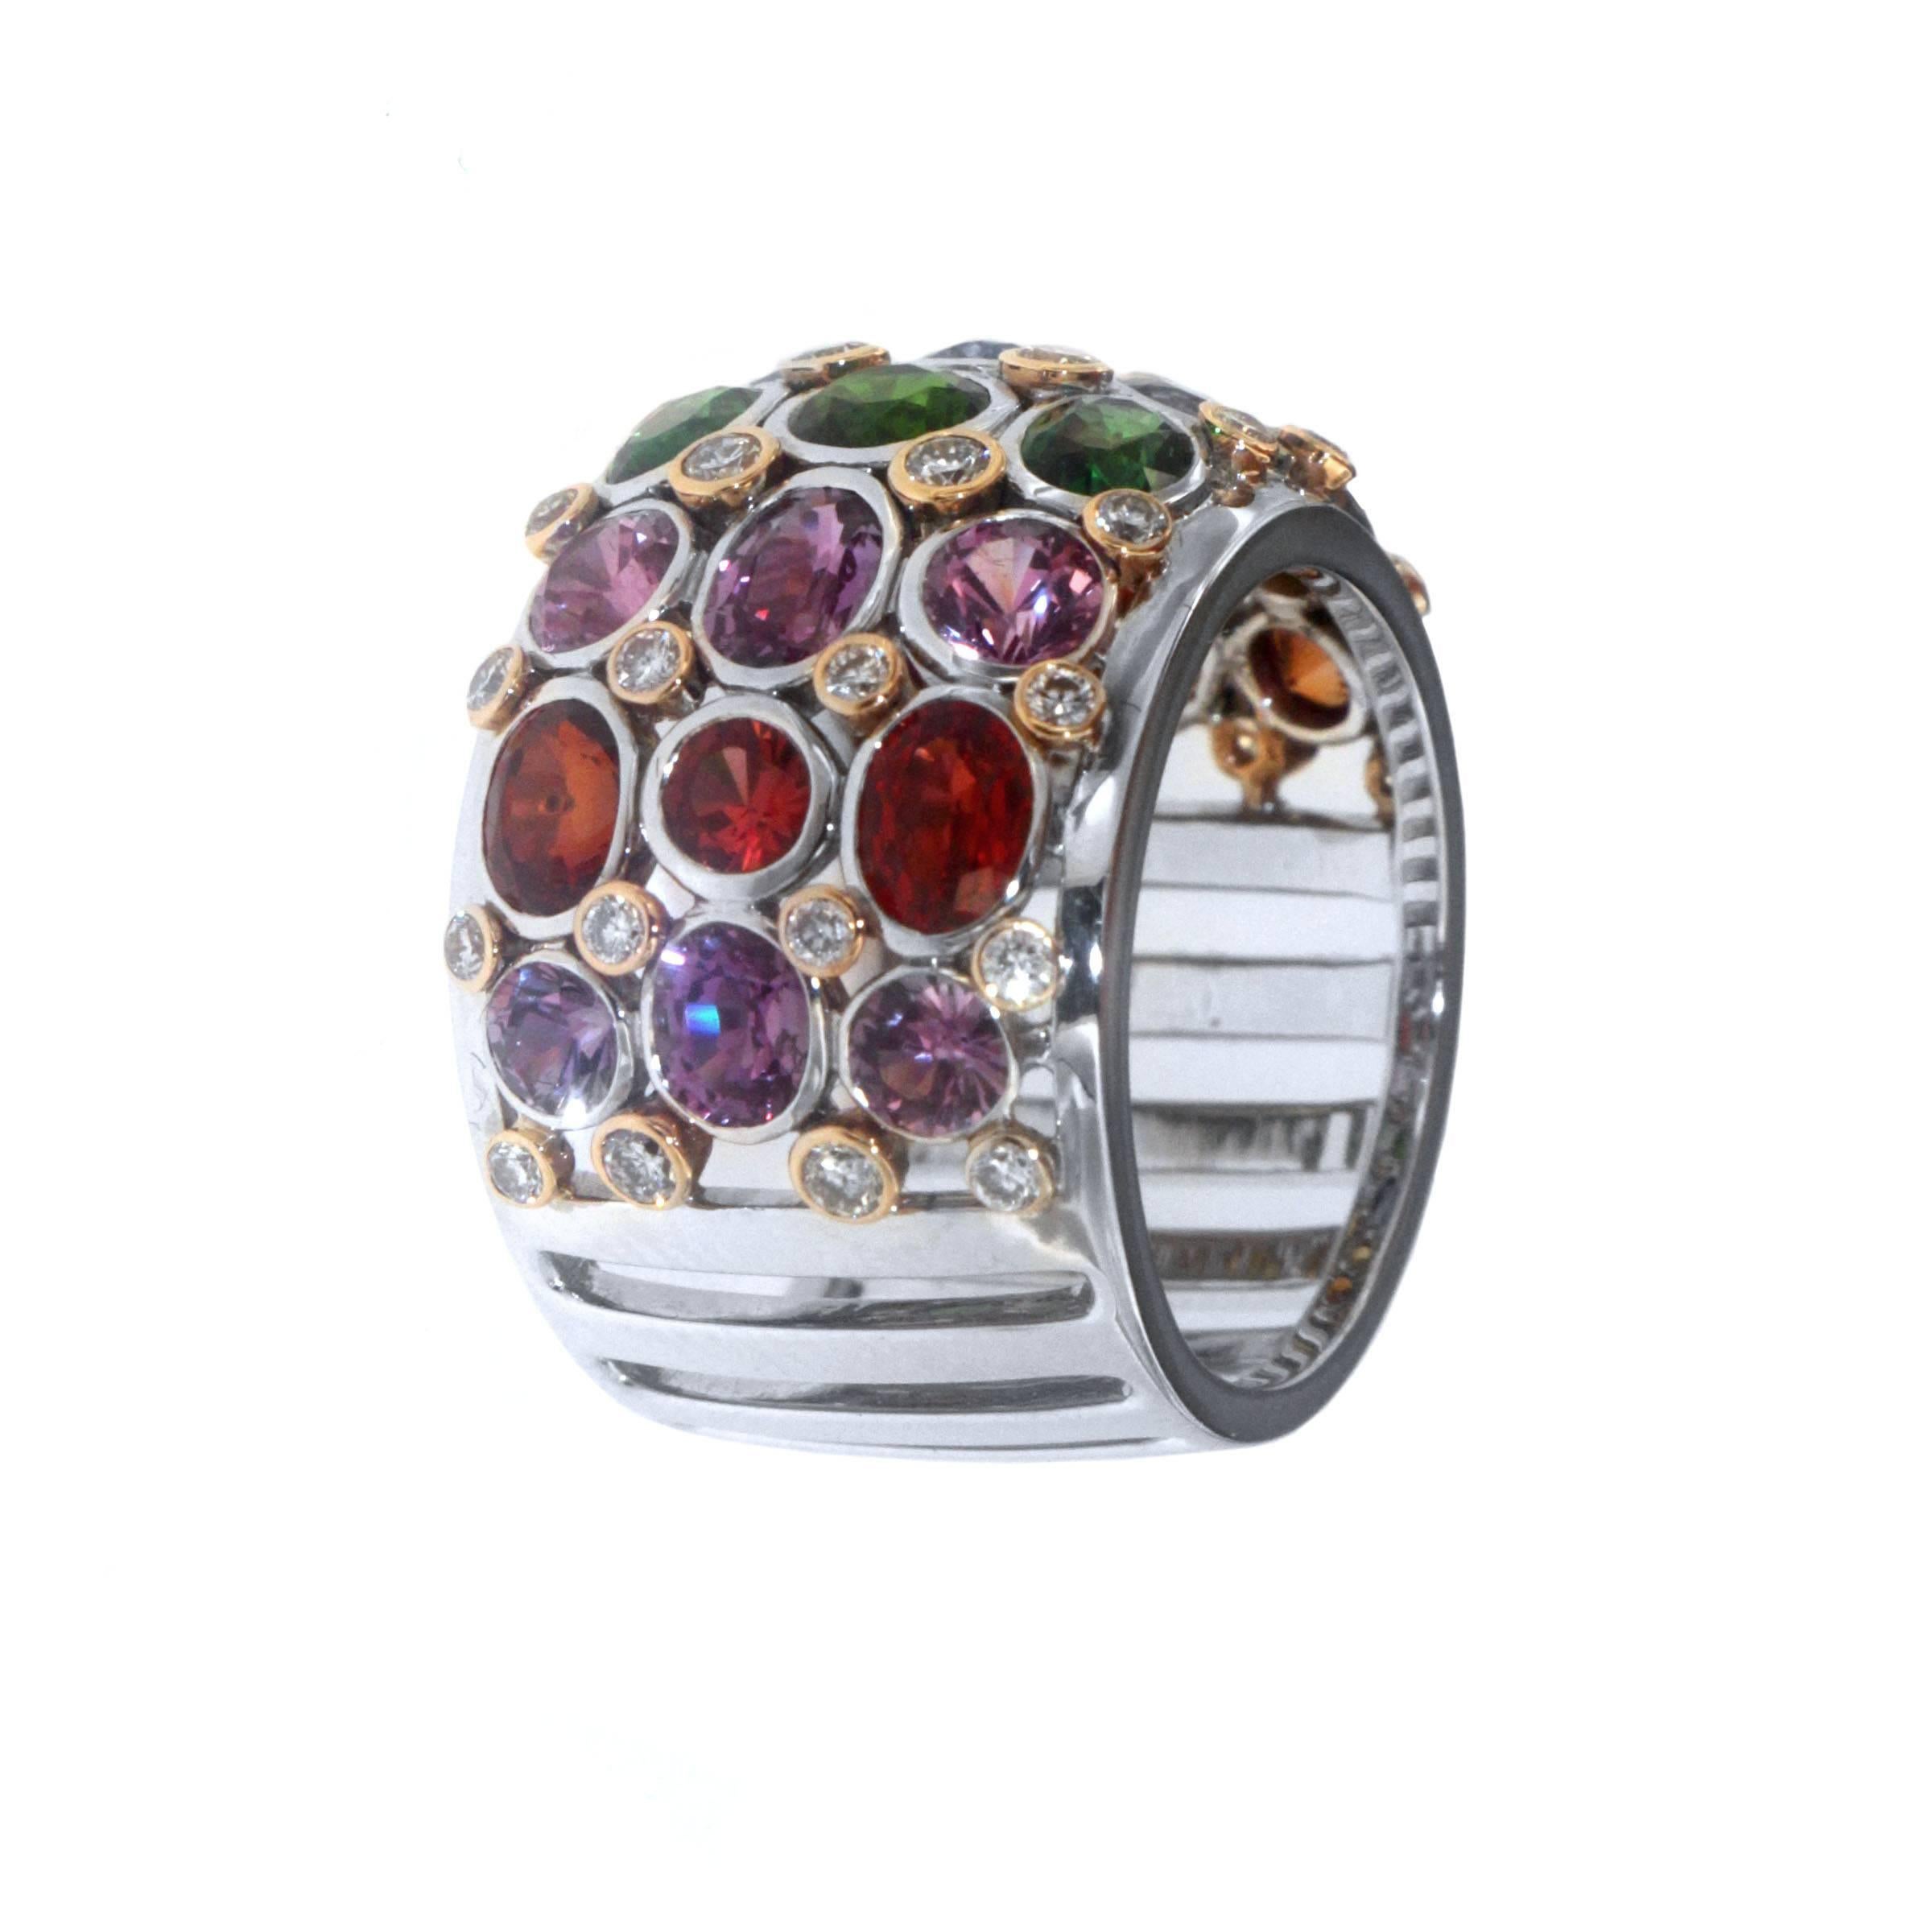 This Gorgous ring is a colorful, precious, and beautiful design in the Zorab Creation selection. The ring is designed and asorted with Multicolored Sapphires the colors include Orange, Yellow, Blue, Pink, Purple, and lastly red with an overall of